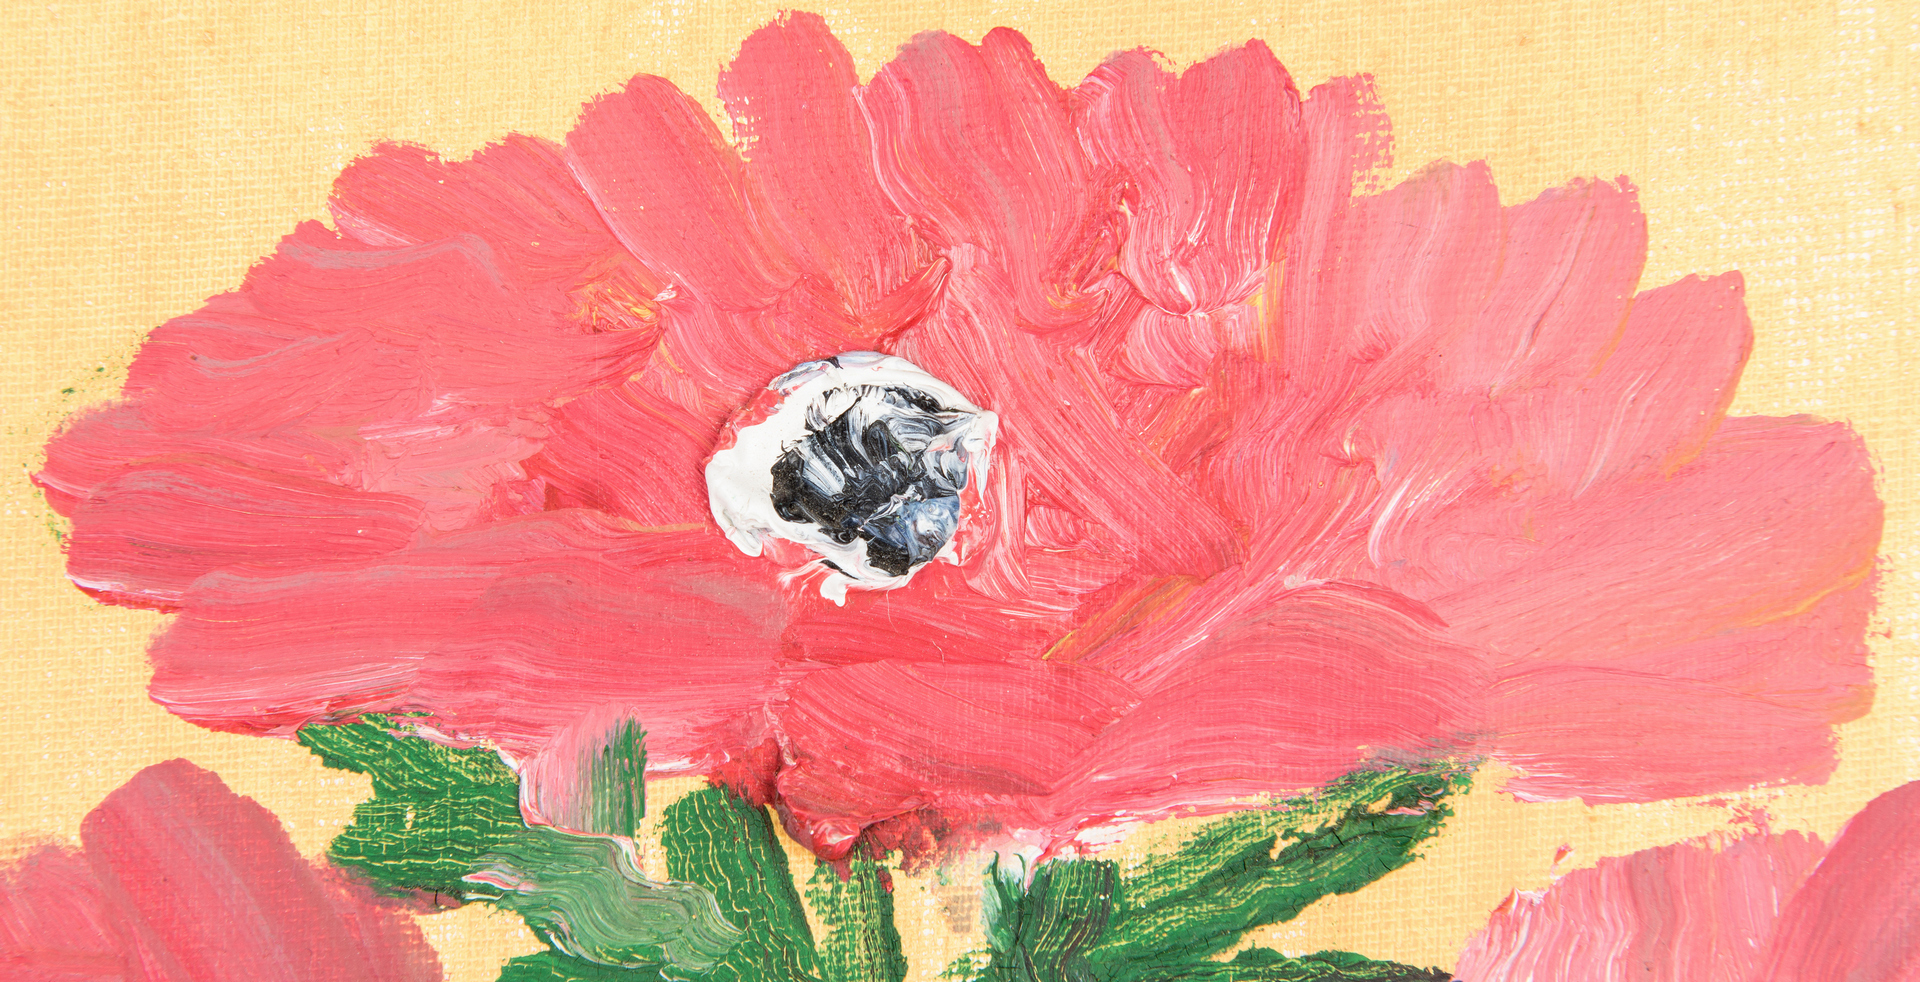 Lot 387: Clementine Hunter painting, Bouquet of Flowers